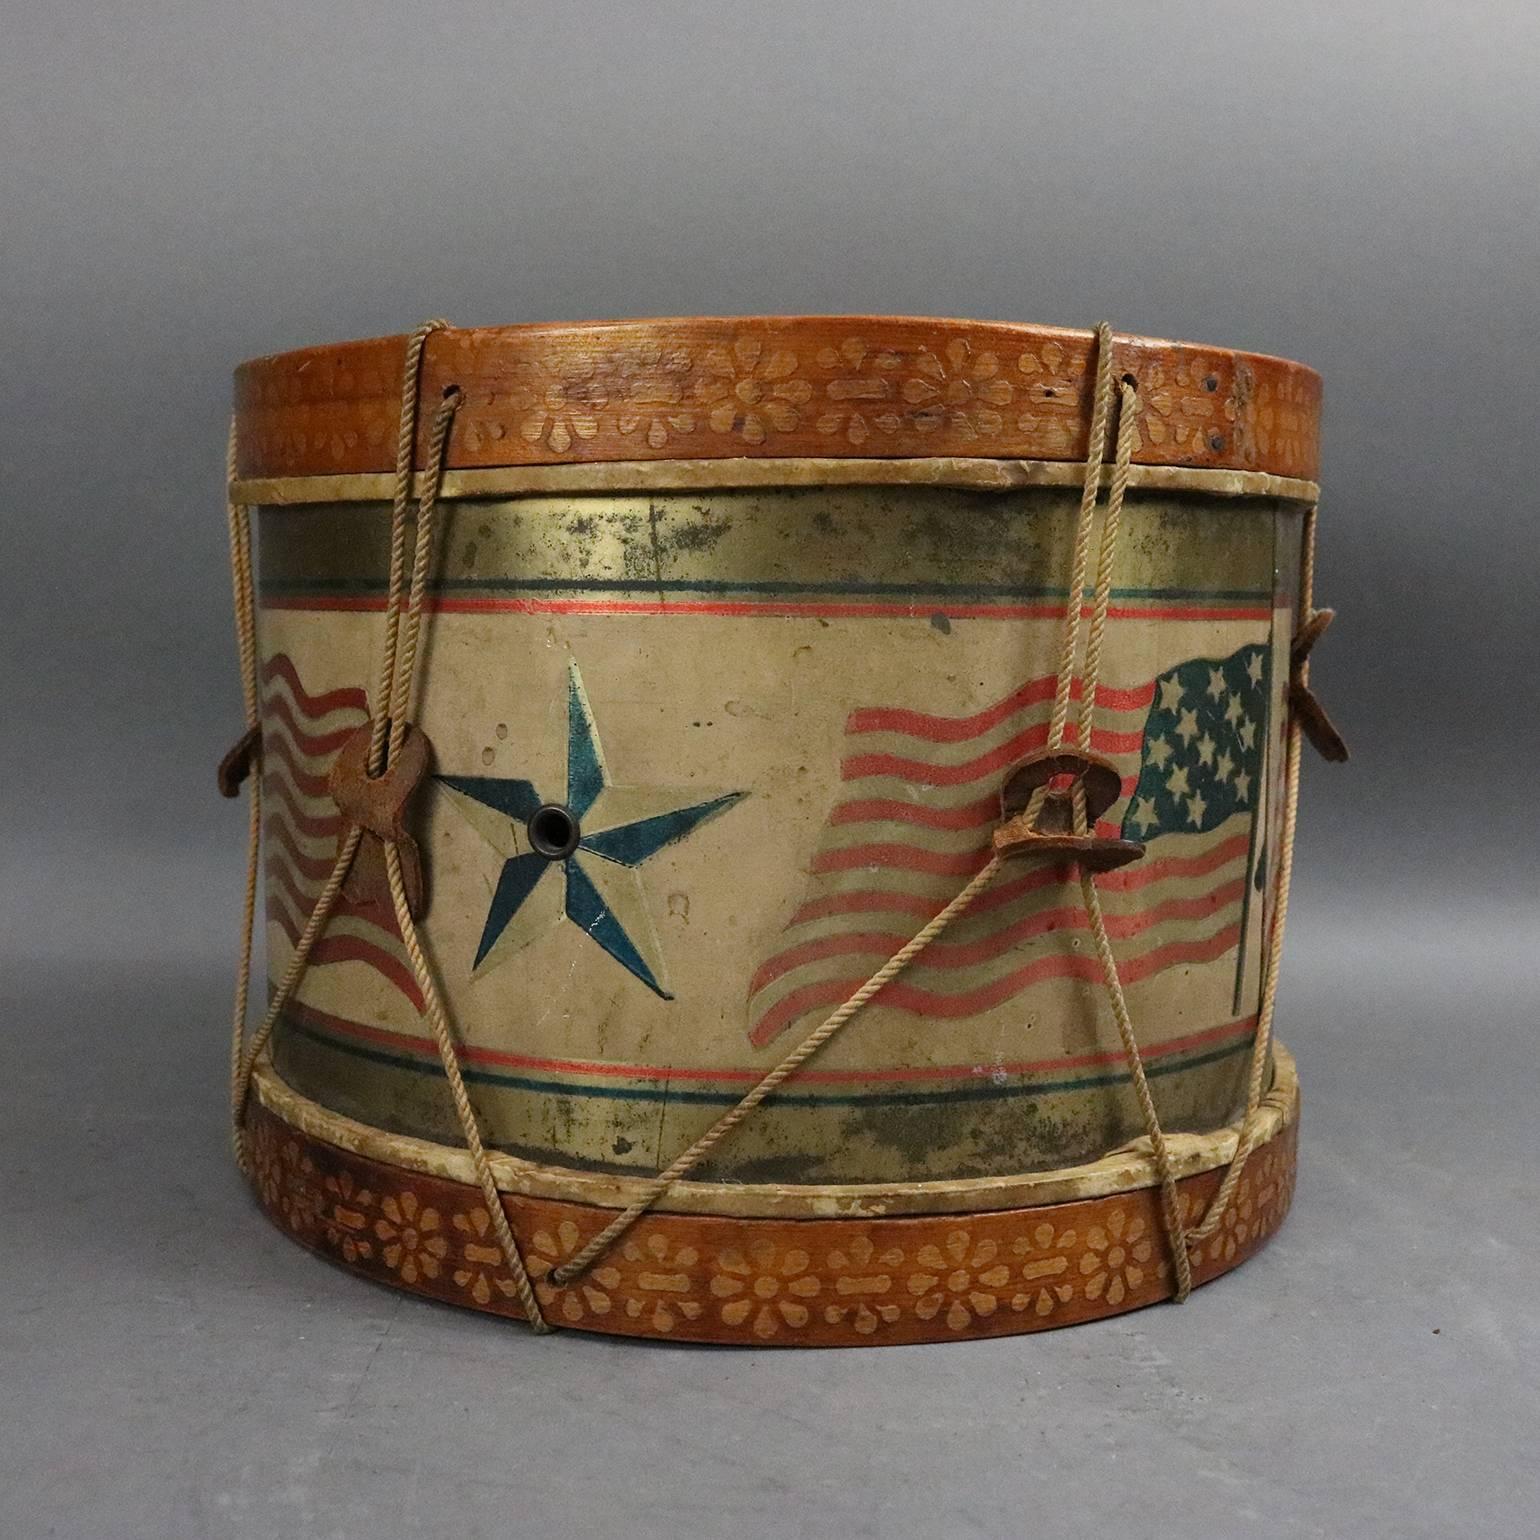 Americana fold art tin drum features patriotic theme of 13-star American flags and stars Stenciled around mid-portion, bordered by Stenciled floral motif upper and lower, leather drum head, circa 1900.

Measures: 8" Height x 11" Diameter